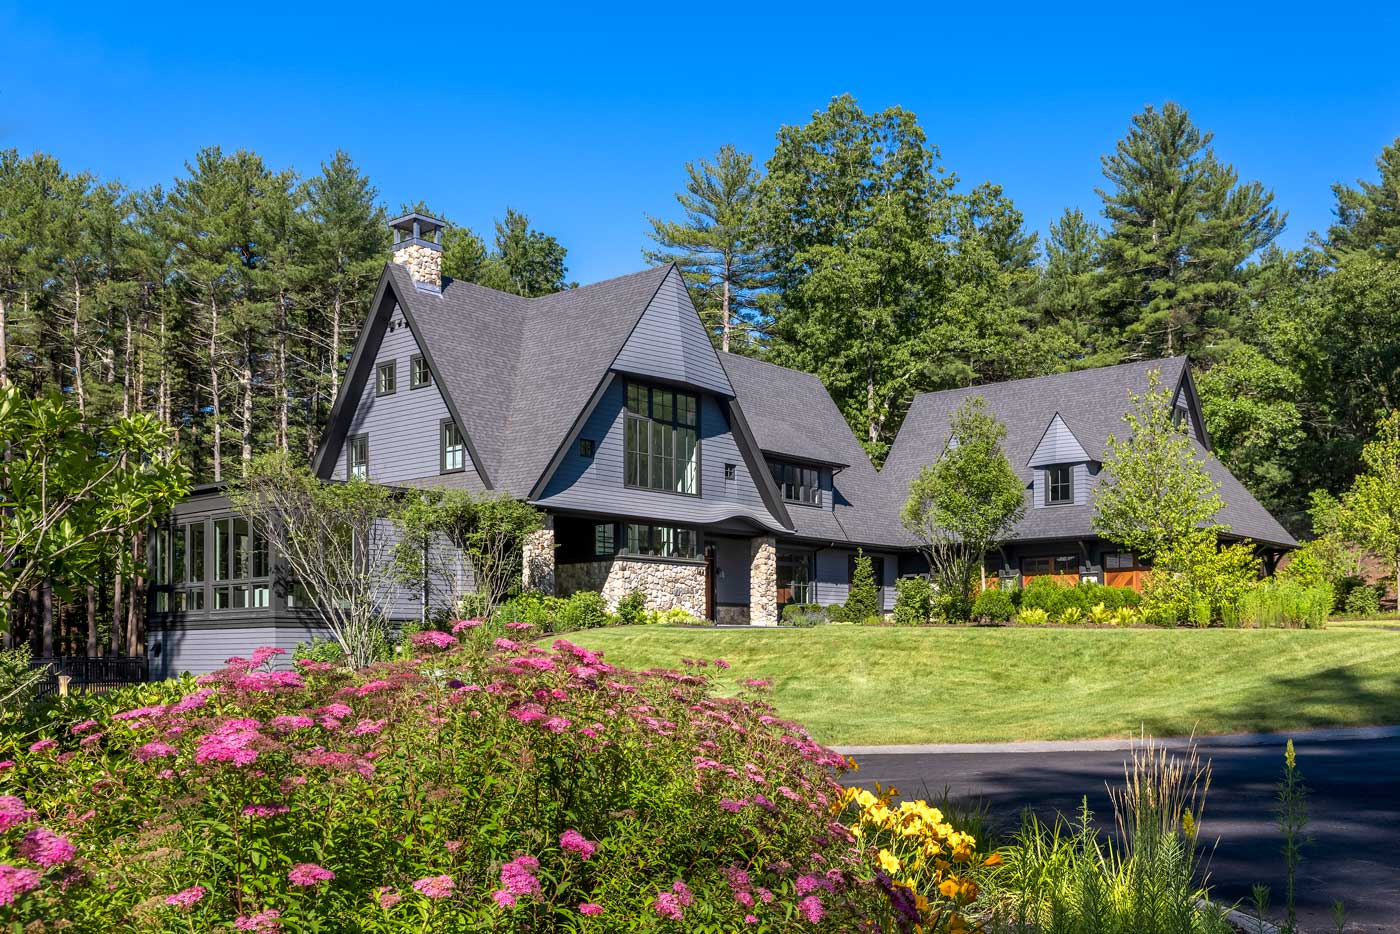 Shingle style home in rural wooded setting Metrowest, MA - Landscape Design by Mathew Cunningham Landscape Design